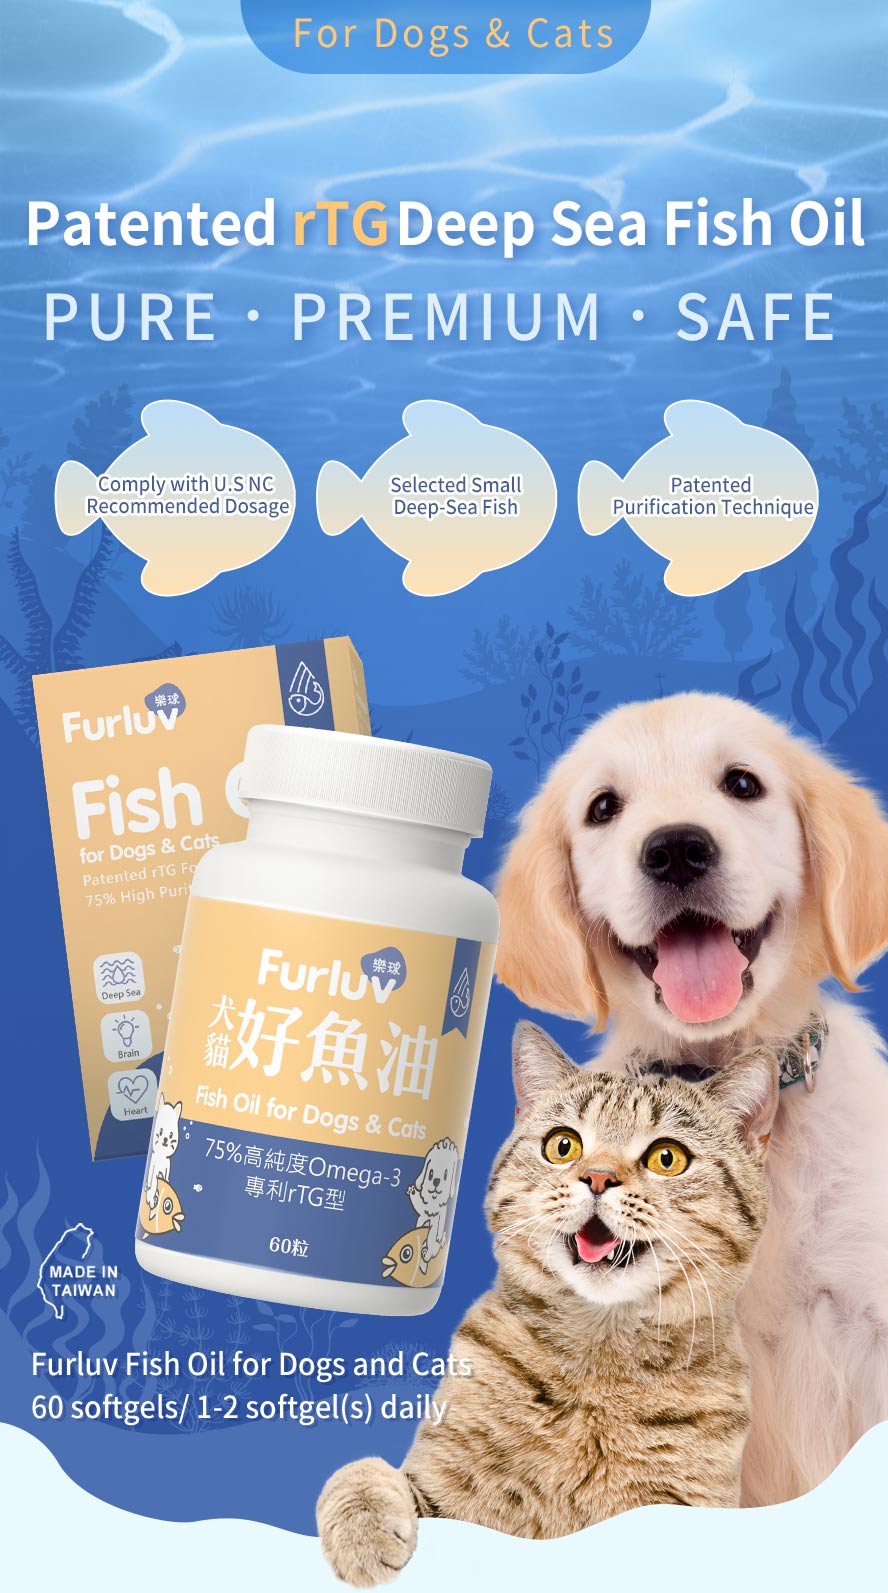 Furluv Fish Oil Softgels for Dogs and Cats uses patented deep sea fish oil, the dosage of omega-3 complies with the U.S NRC, and patented purification technique to ensure pure fish oil quality.